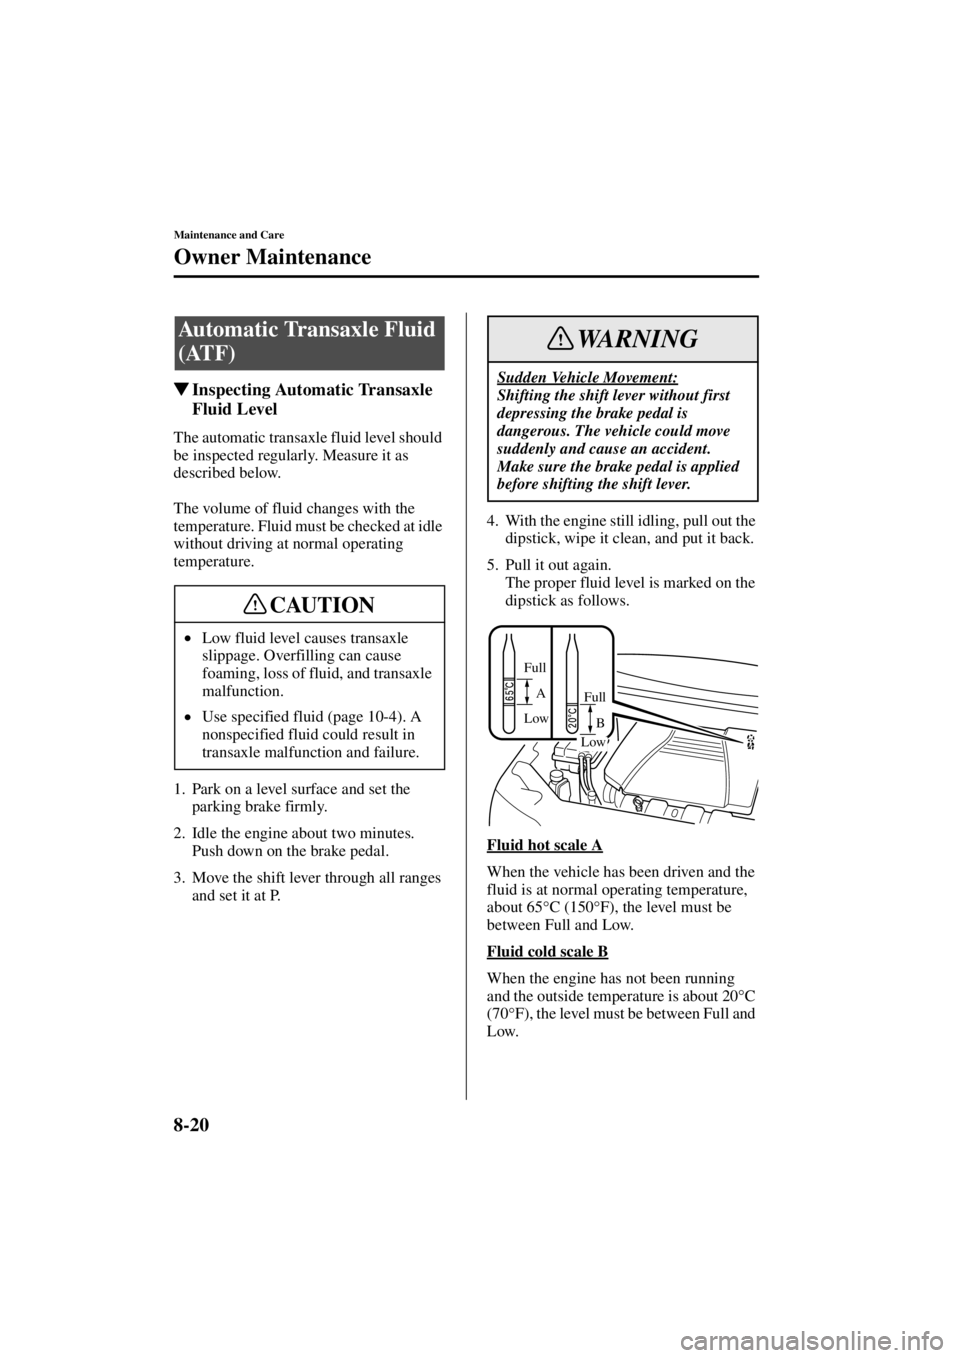 MAZDA MODEL 3 4-DOOR 2004  Owners Manual 8-20
Maintenance and Care
Owner Maintenance
Form No. 8S18-EA-03I
Inspecting Automatic Transaxle 
Fluid Level
The automatic transaxle fluid level should 
be inspected regularly. Measure it as 
describ